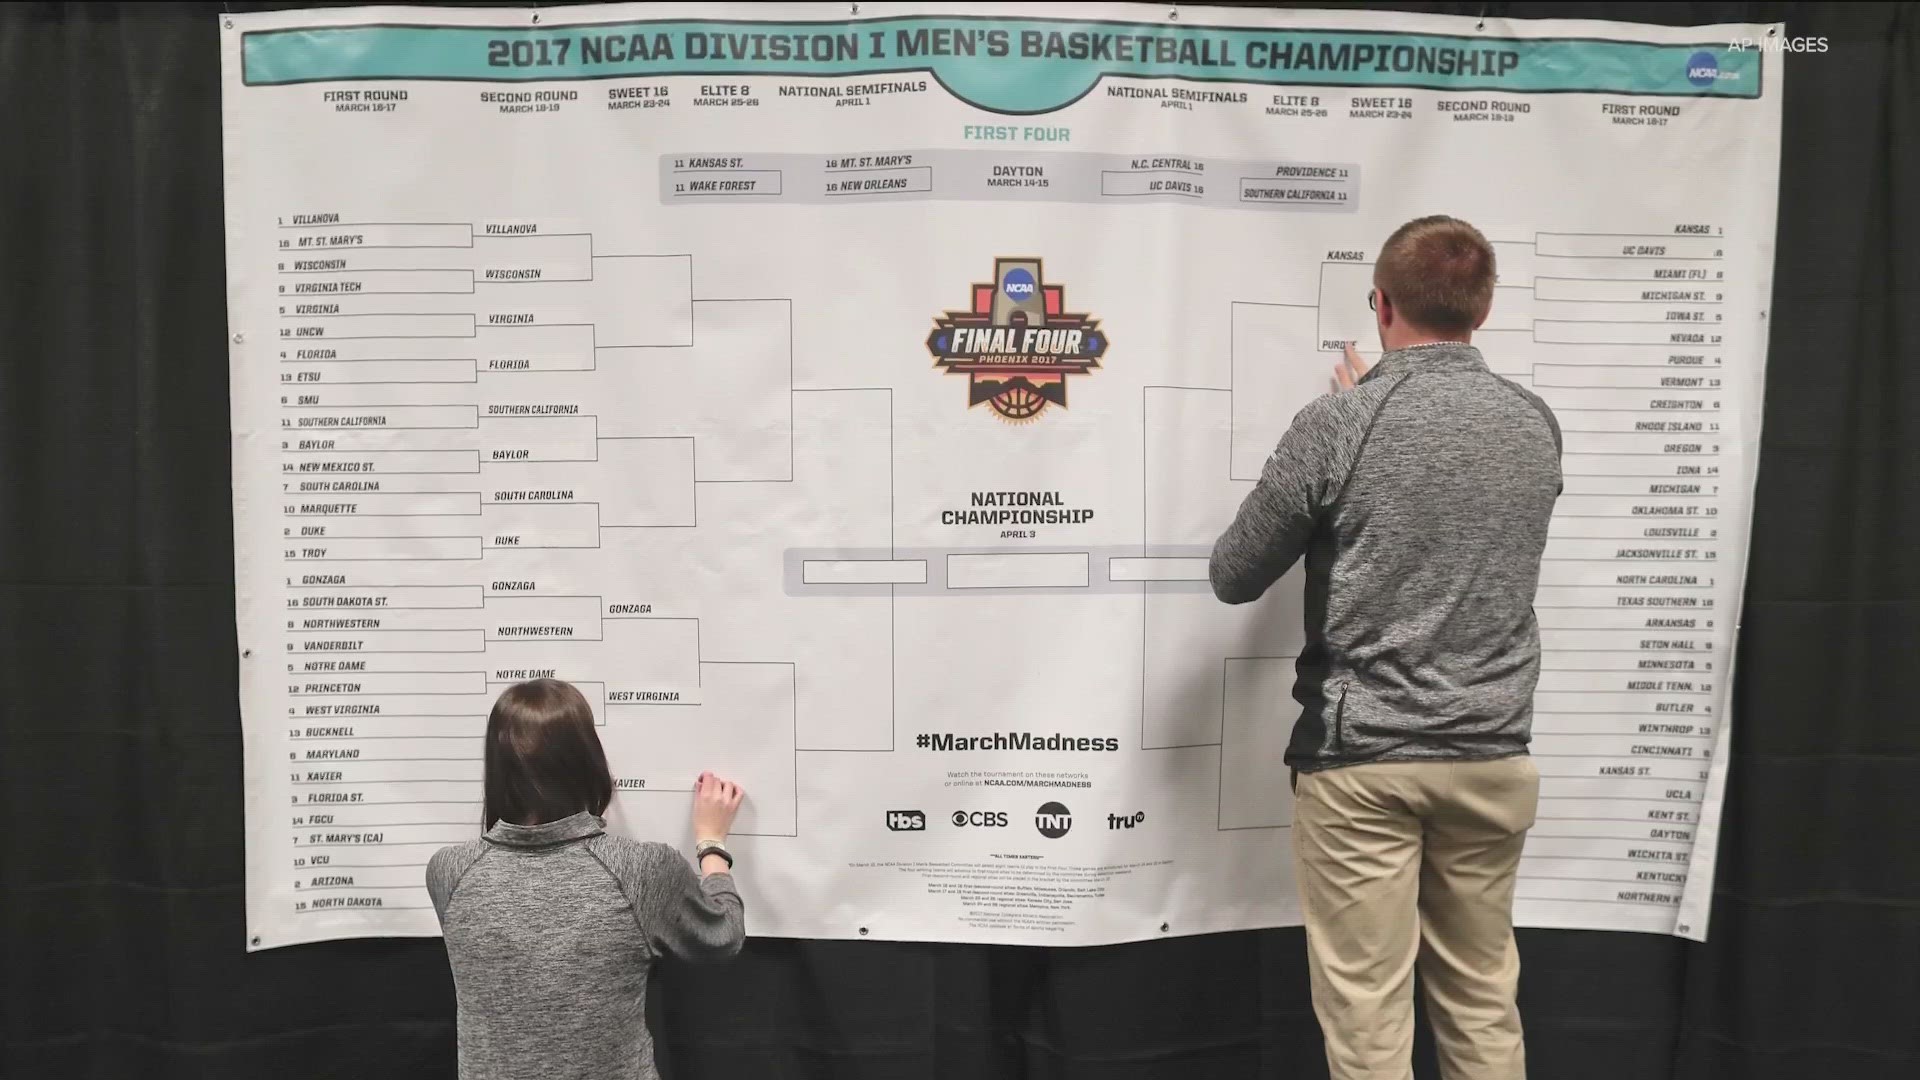 No person has ever correctly predicted all 63 NCAA men’s basketball tournament games in a documented bracket.